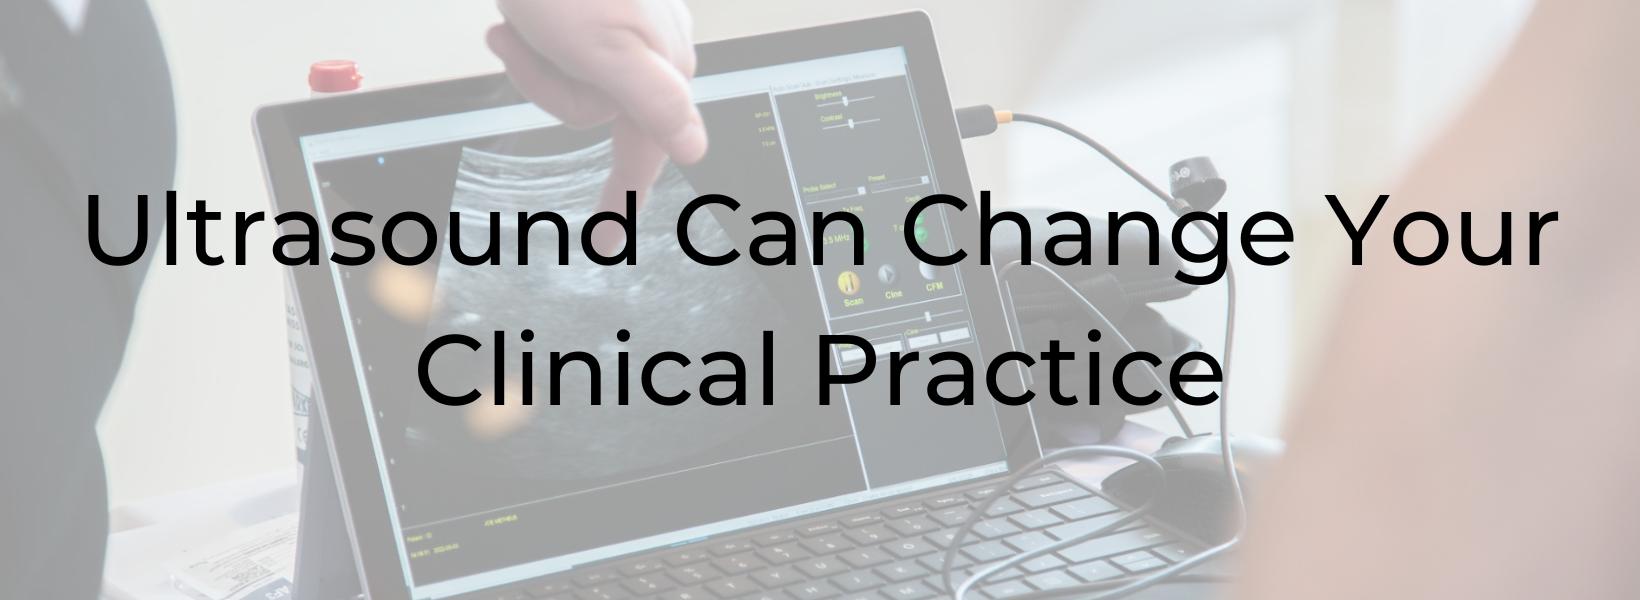 Ultrasound Can Change Your Clinical Practice